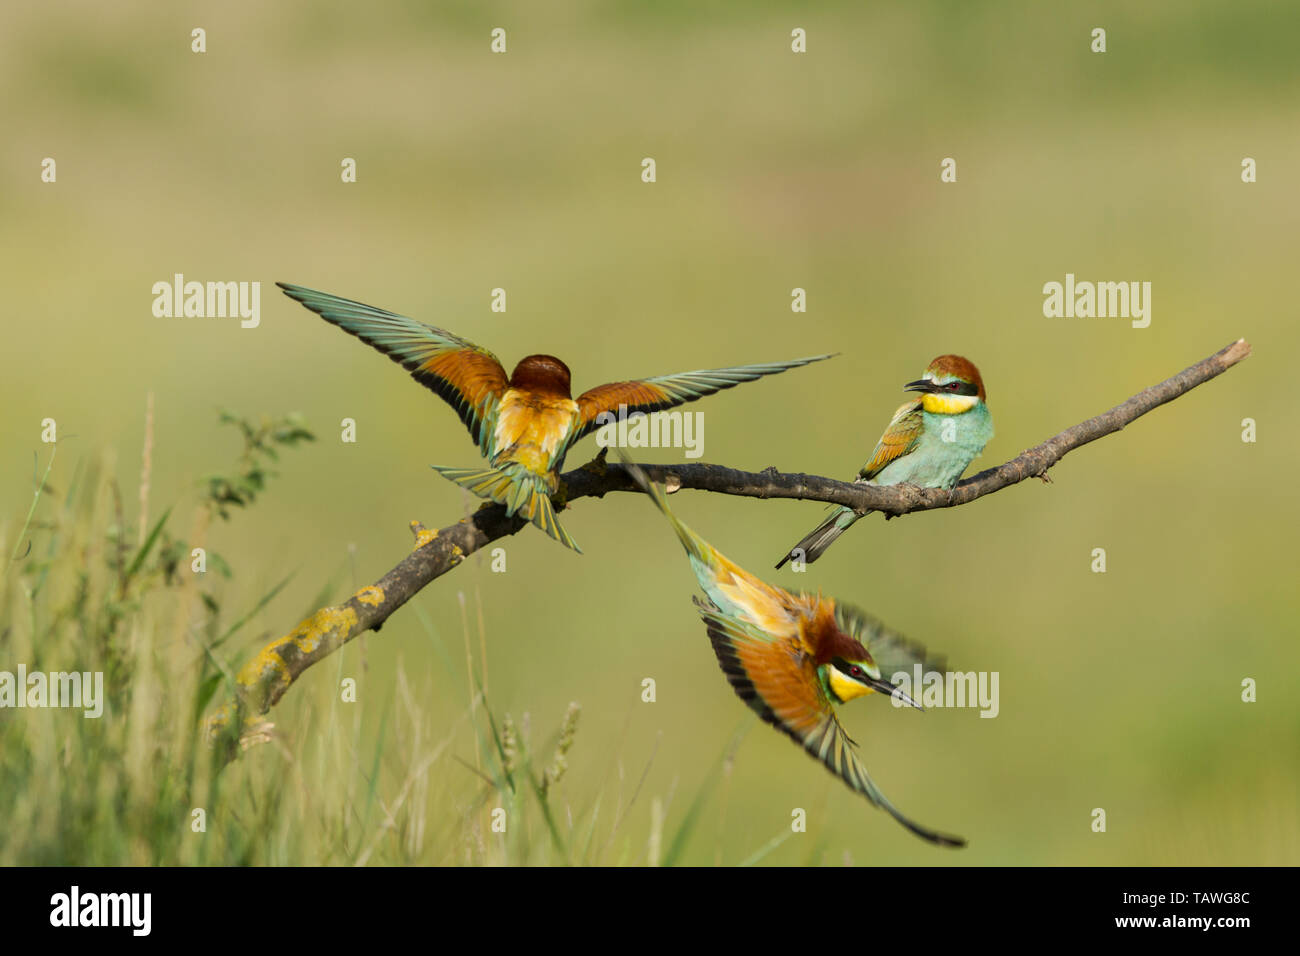 European bee-eater, Latin name Merops apiaster, a male bird chases off an interloper showing interest in his mate, set against a green background Stock Photo